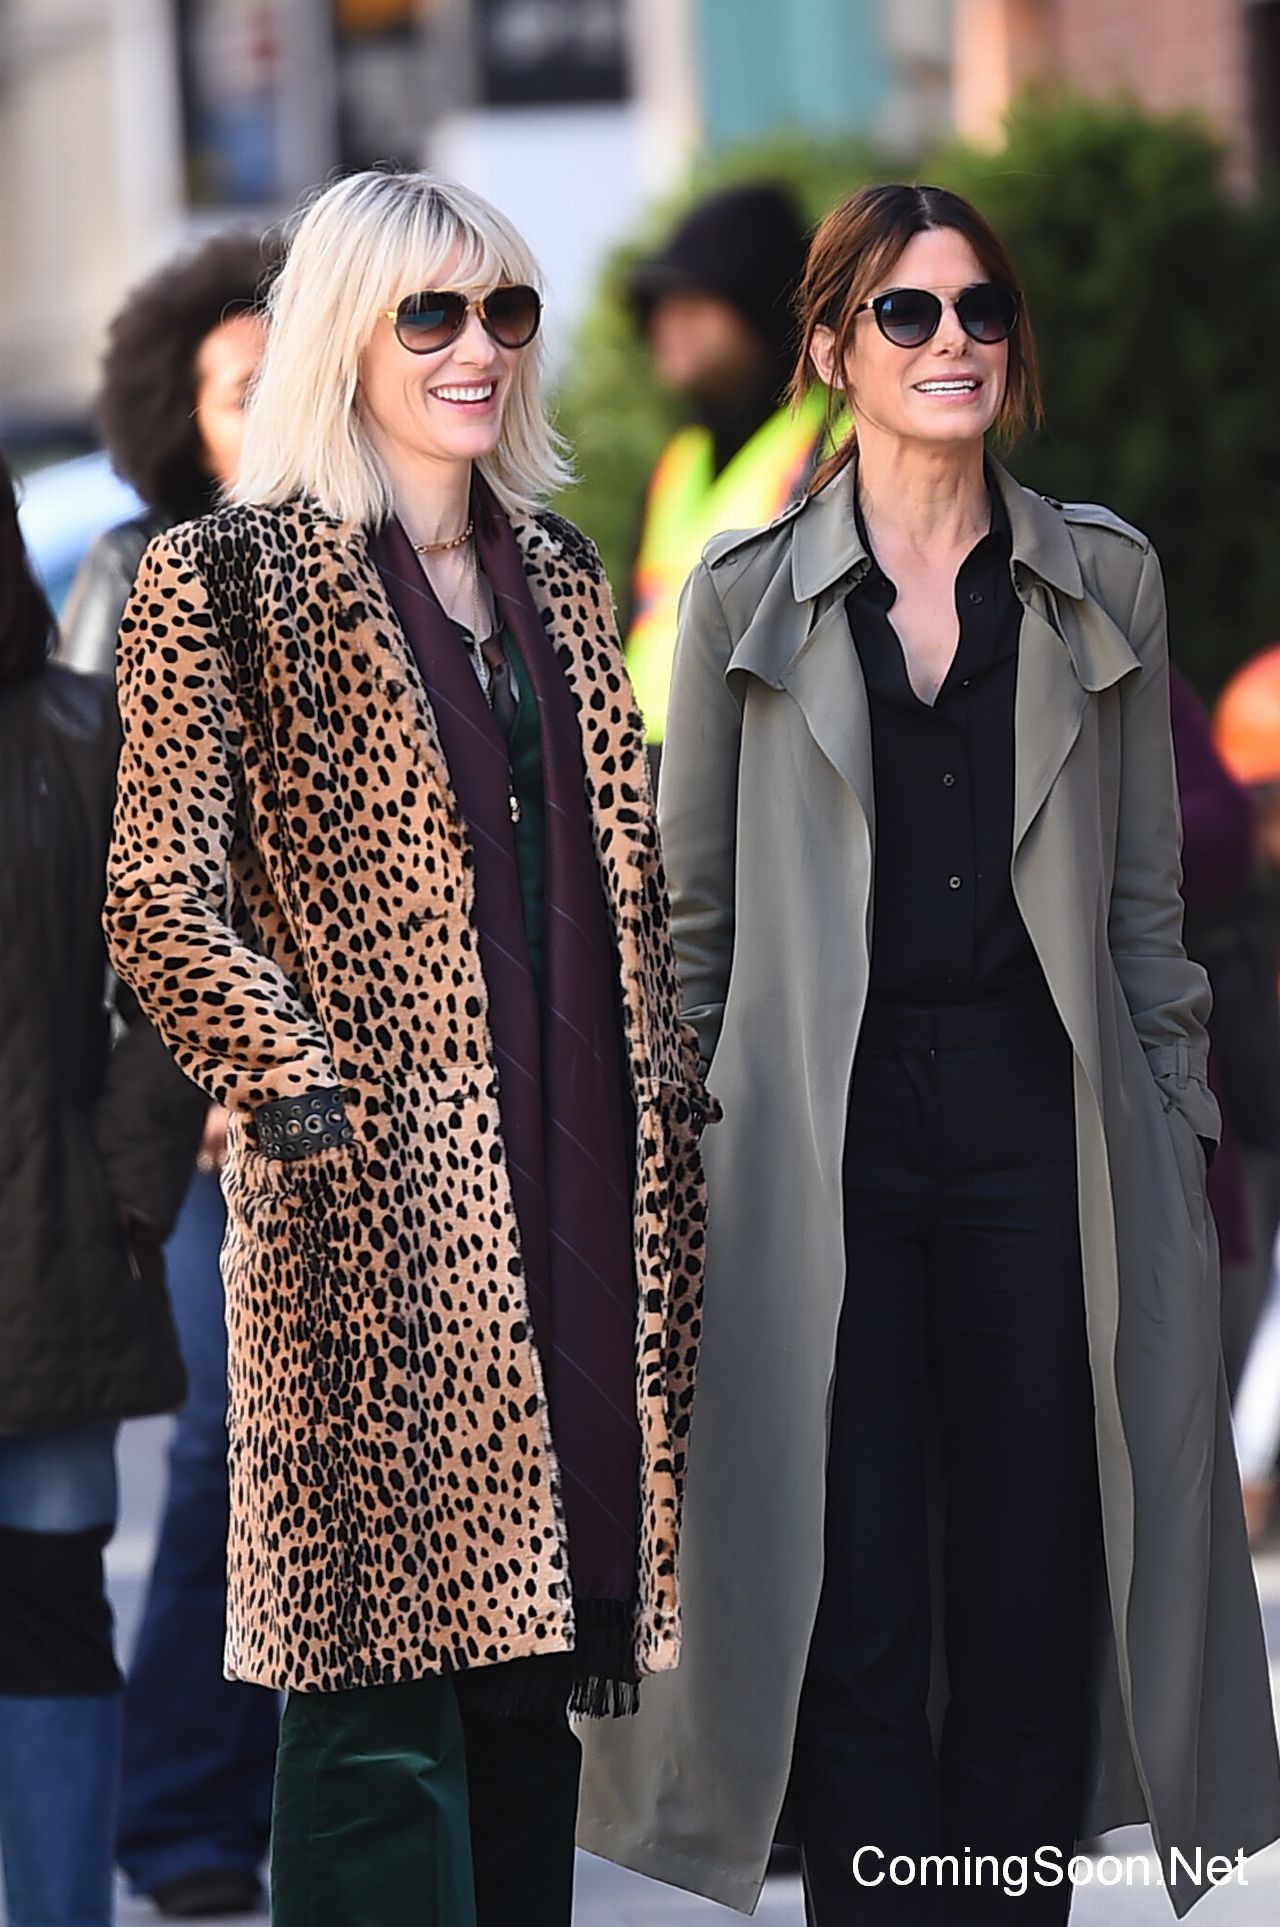 NEW YORK, NY - OCTOBER 24:  Actress Sandra Bullock (R) and Cate Blanchett are seen on the set of 'Ocean's Eight' on October 24, 2016 in New York City.  (Photo by Raymond Hall/GC Images)